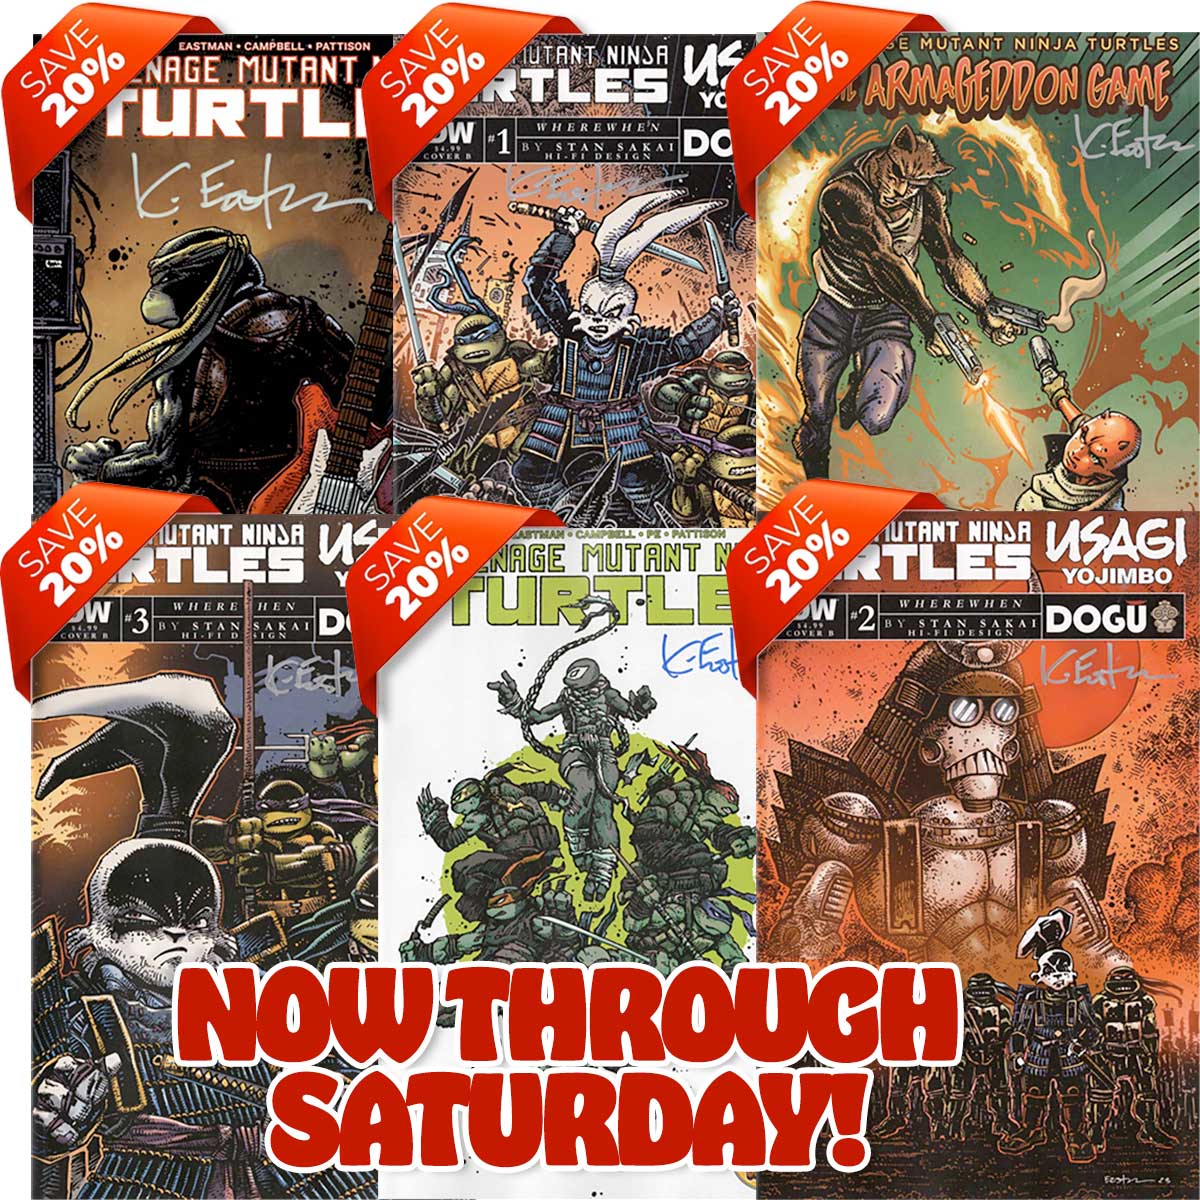 Enjoy savings in the Comics Department this week at my Kevin Eastman Studios website store. Use Coupon Code JuneBooks (all one word) at checkout and your discount will be automatically applied. - COWABUNGA 👍😀🍕 #TMNT #TeamEastman conta.cc/3qAYavo